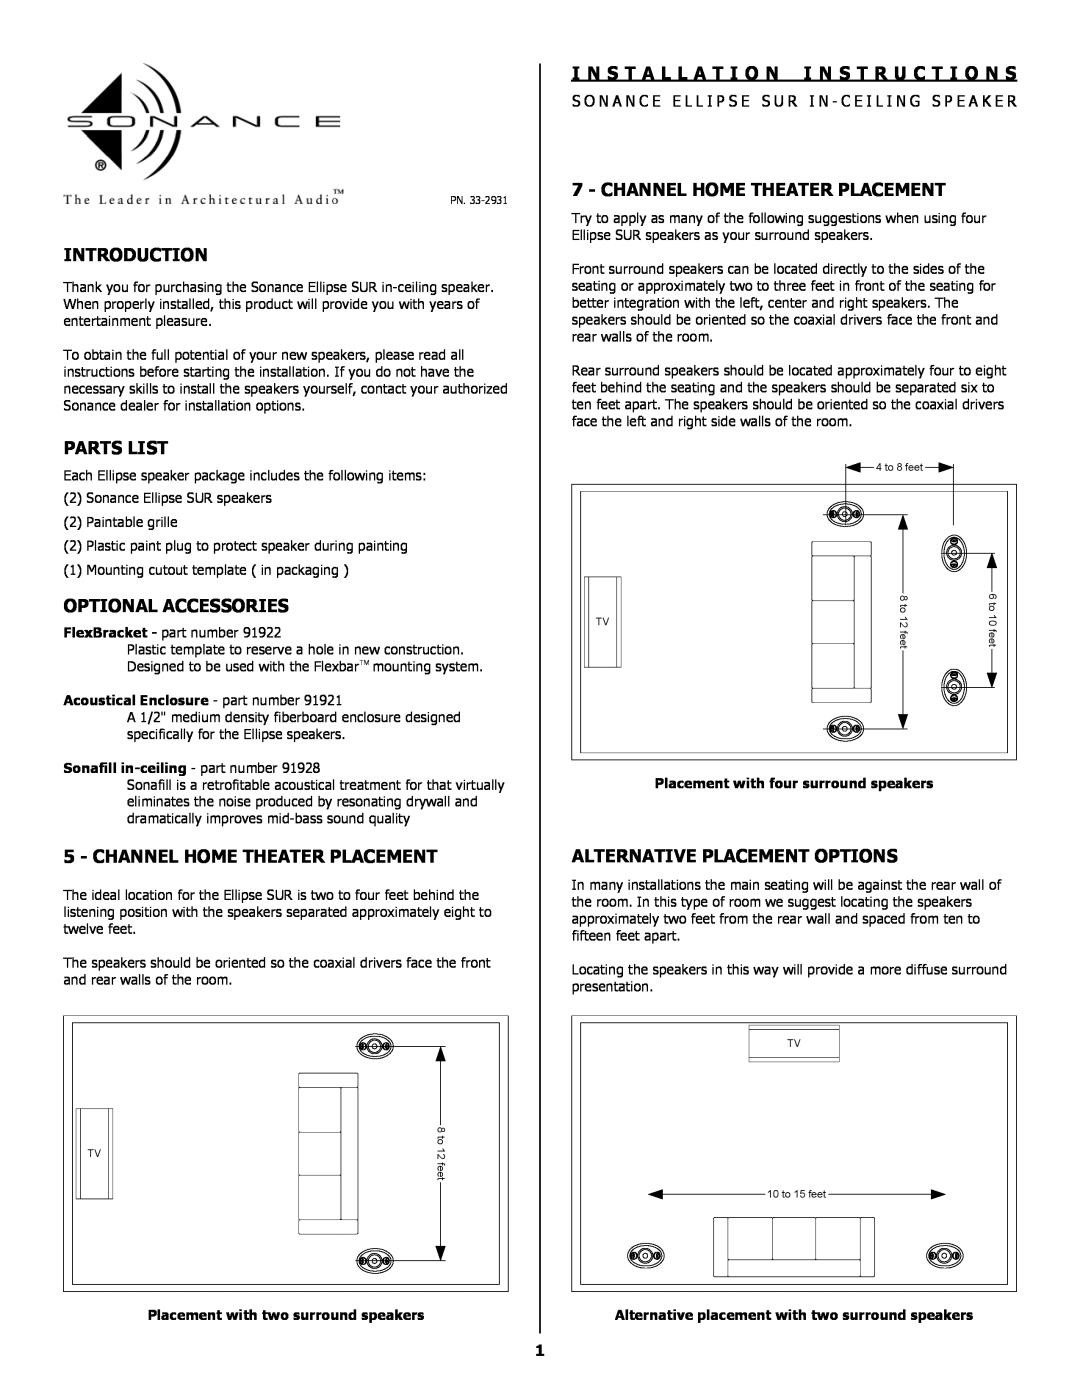 Sonance 33-2931 installation instructions Introduction, Parts List, Optional Accessories, Channel Home Theater Placement 